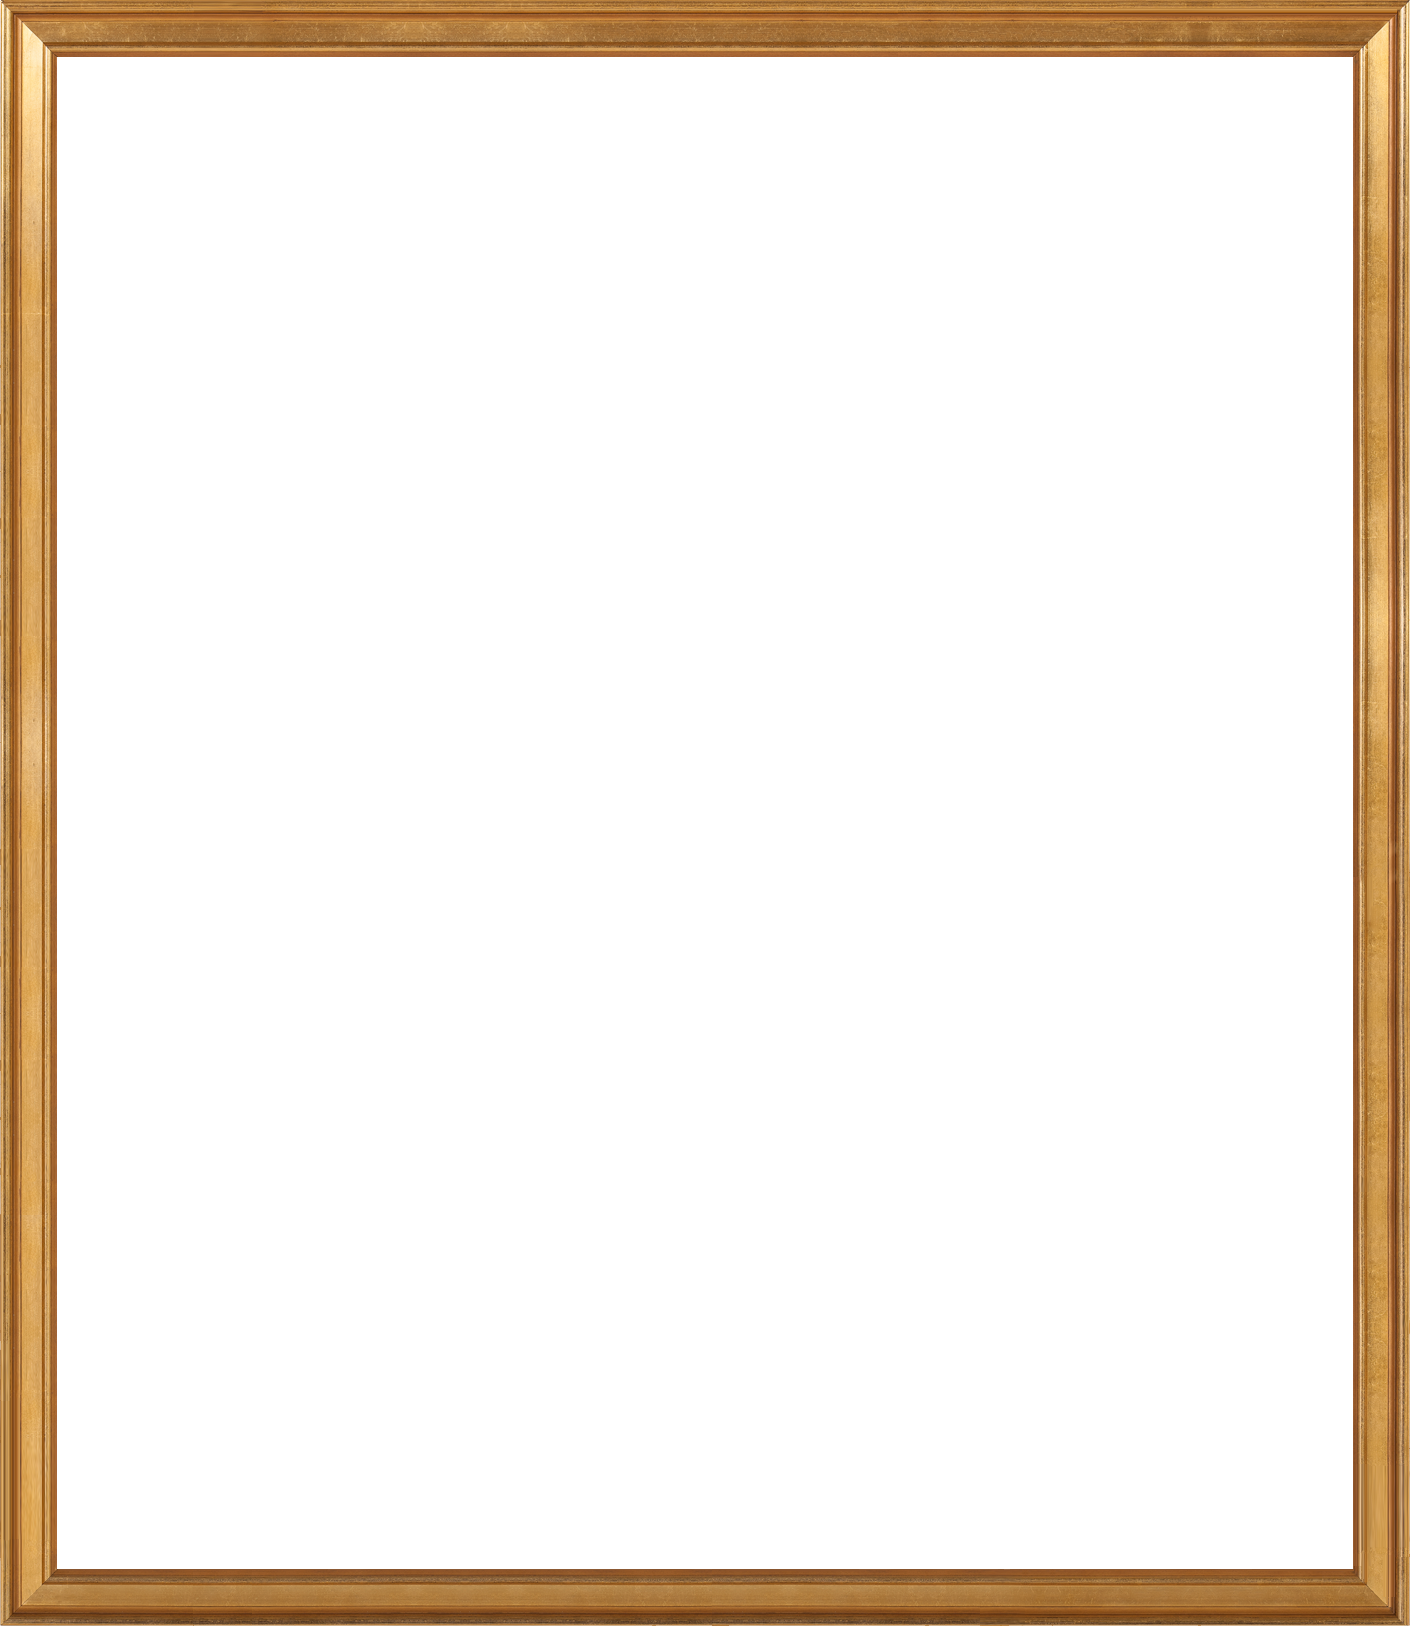 Heart Frames Gold Frame Png Silver Simple Fuzzy Border Wallpaper 